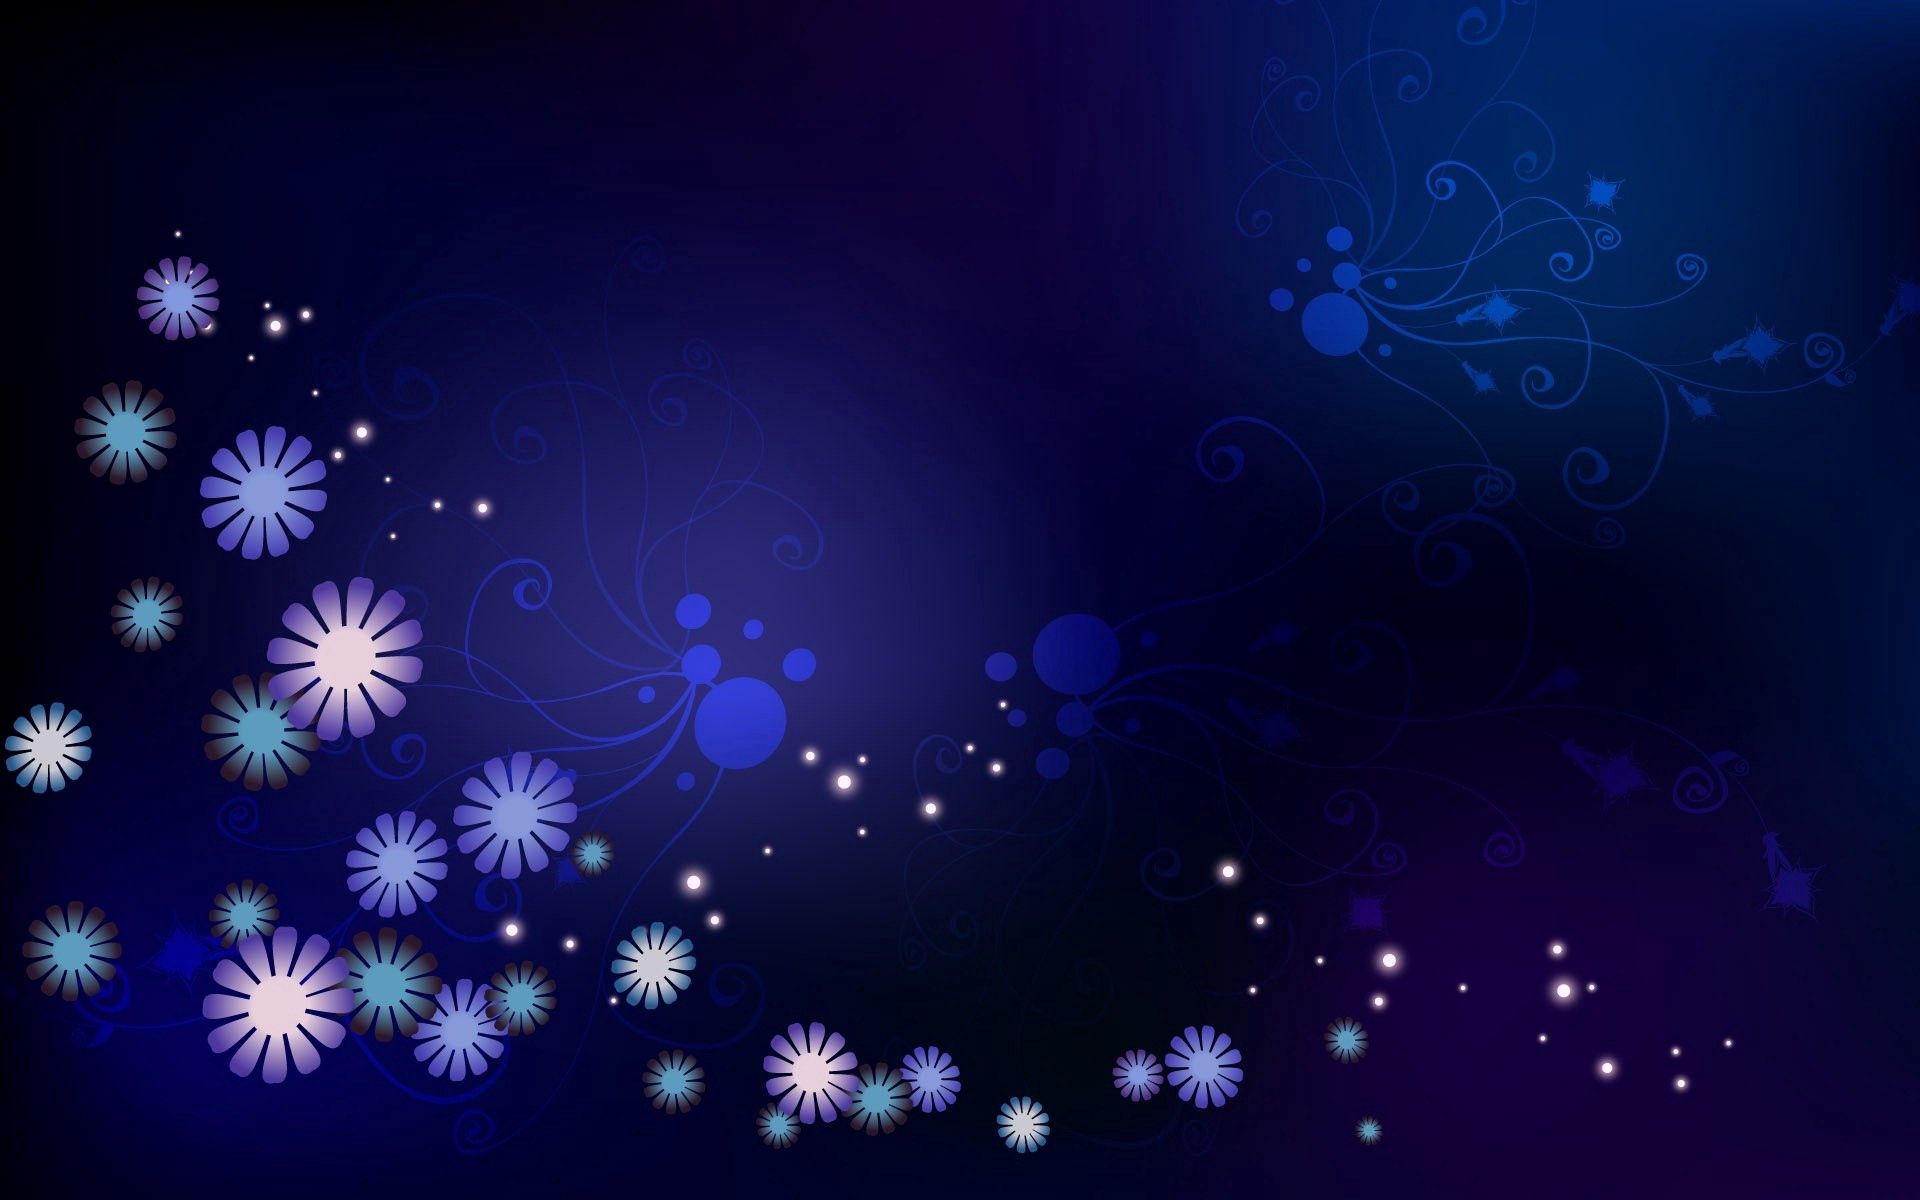 color, points, point, flowers, abstract, background, stars, circles, shine, light Aesthetic wallpaper